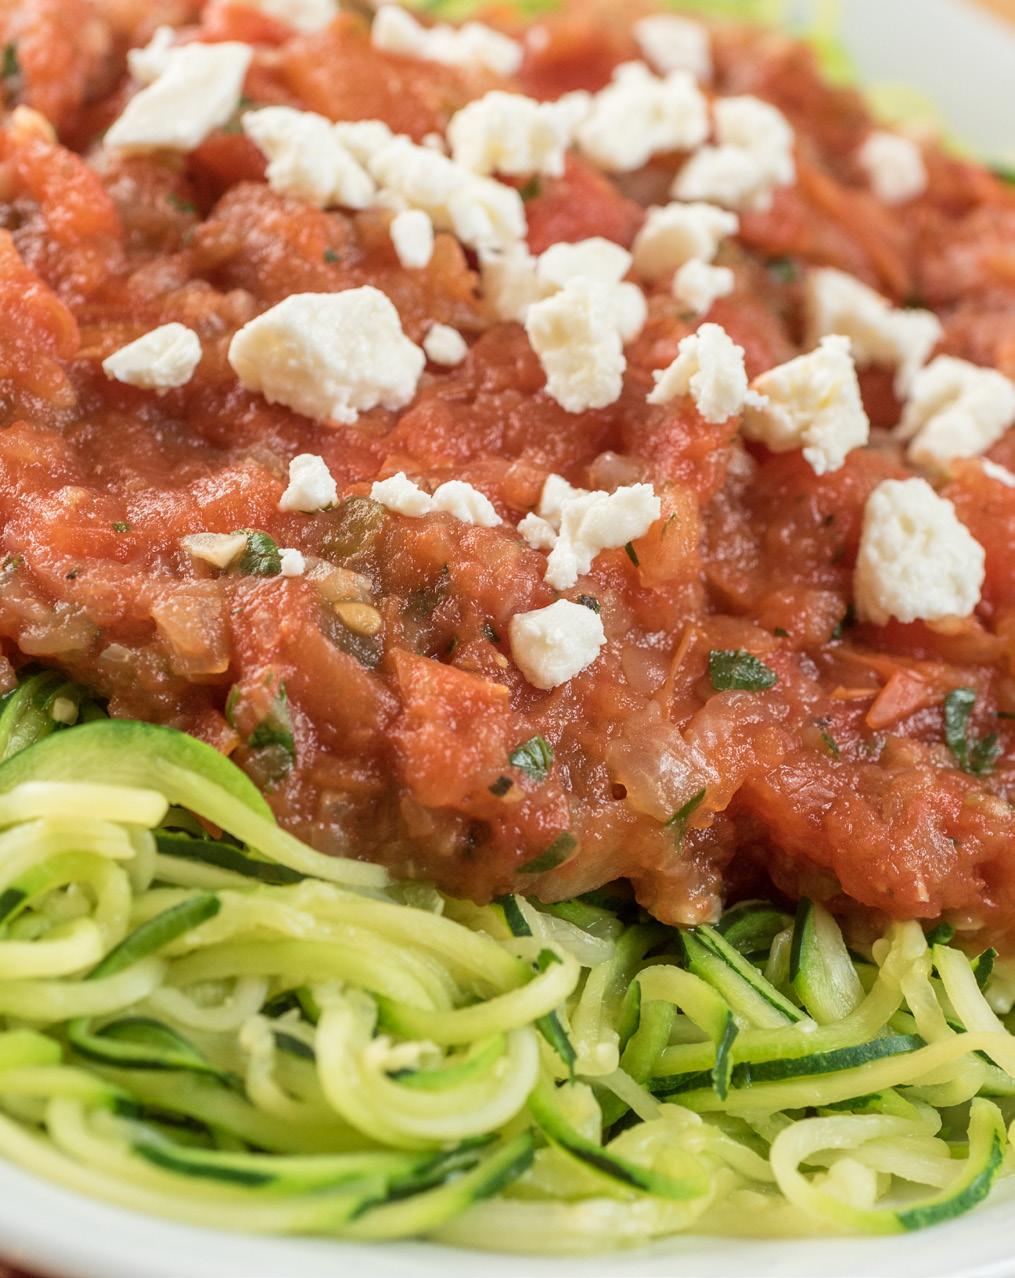 Zucchini Noodles with Salsa & Feta Serves: 4-6 4 medium zucchini 1 tablespoon olive oil 1 large onion, chopped 2 cloves garlic, chopped 4 pounds plum tomatoes, cored and chopped 1 small jalapeño